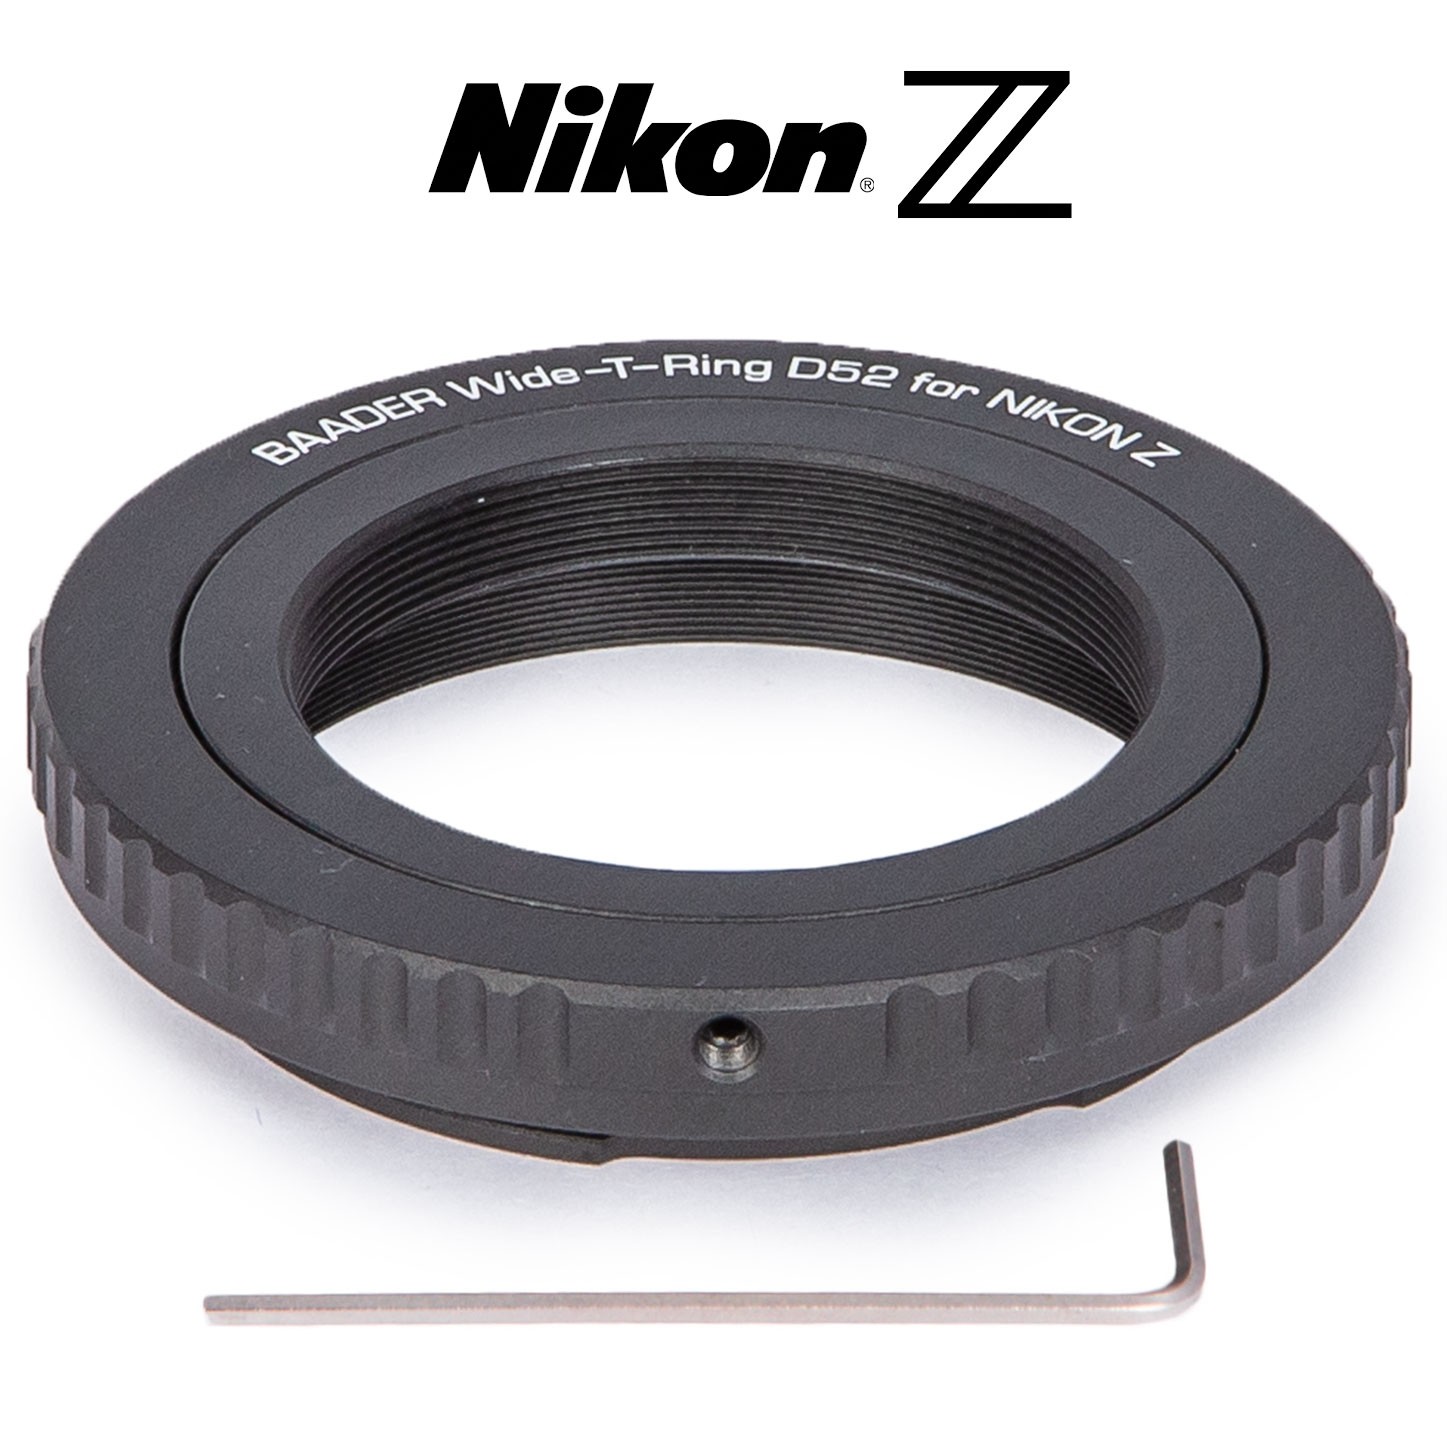 Baader Wide-T-Ring Nikon Z (for Nikon Z bajonet) with D52i to T-2 